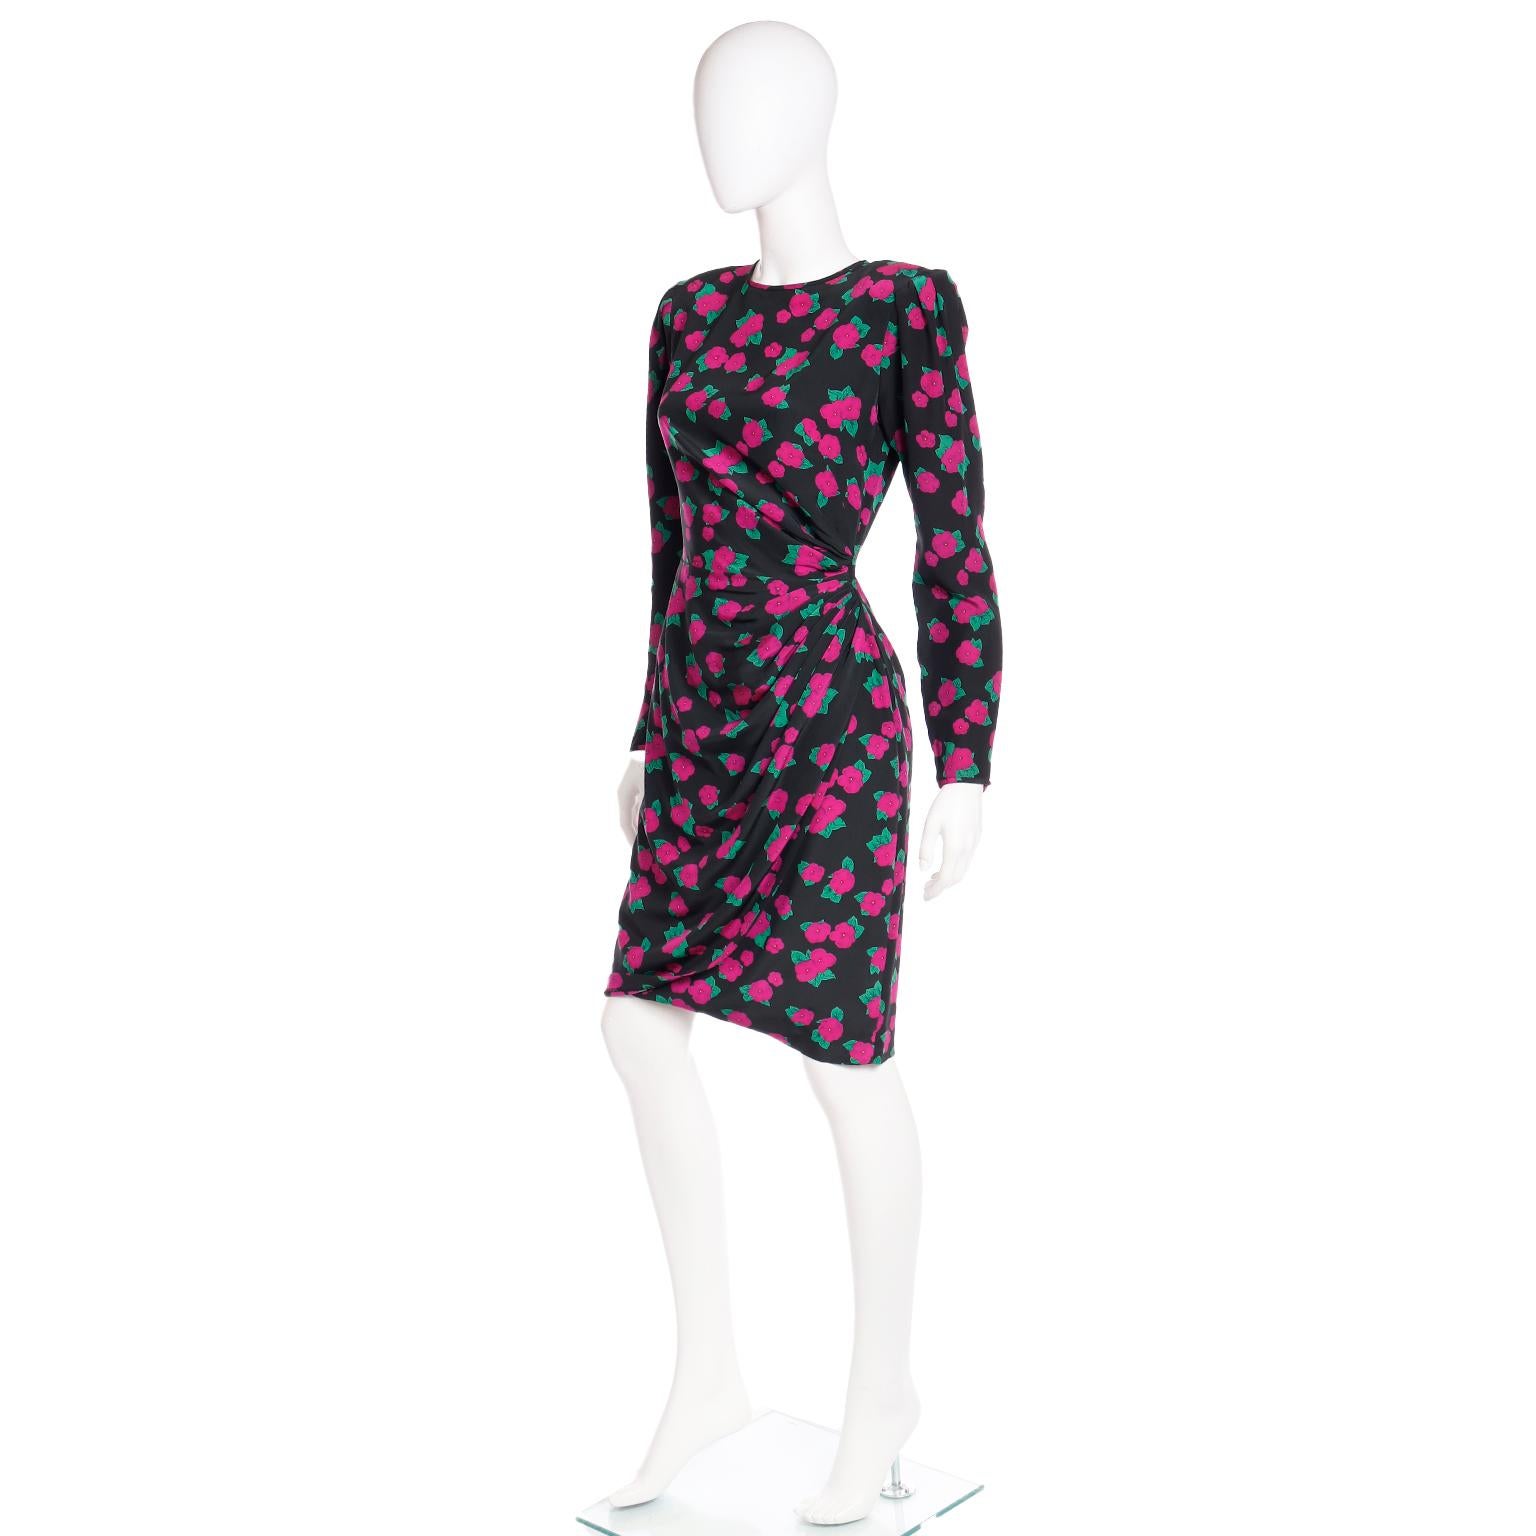 Ungaro Vintage Black Silk Dress in Magenta Pink and Green Floral Print In Excellent Condition For Sale In Portland, OR